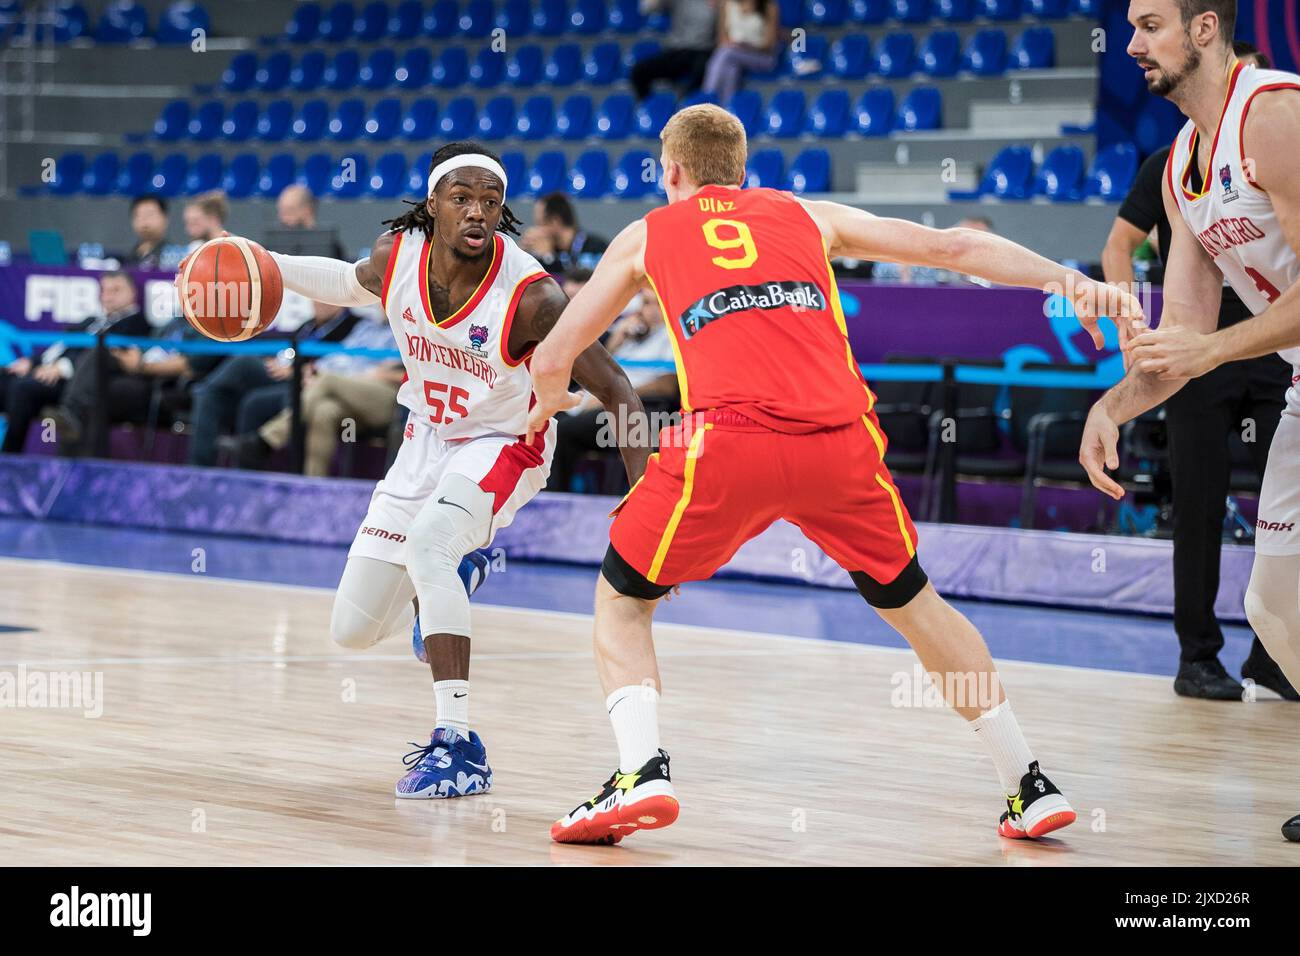 Tbilisi, Georgia, 6th September 2022. Kendrick Dennard Perry of Montenegro in action during the FIBA EuroBasket 2022 group A match between Montenegro and Spain at Tbilisi Arena in Tbilisi, Georgia. September 6, 2022. Credit: Nikola Krstic/Alamy Stock Photo